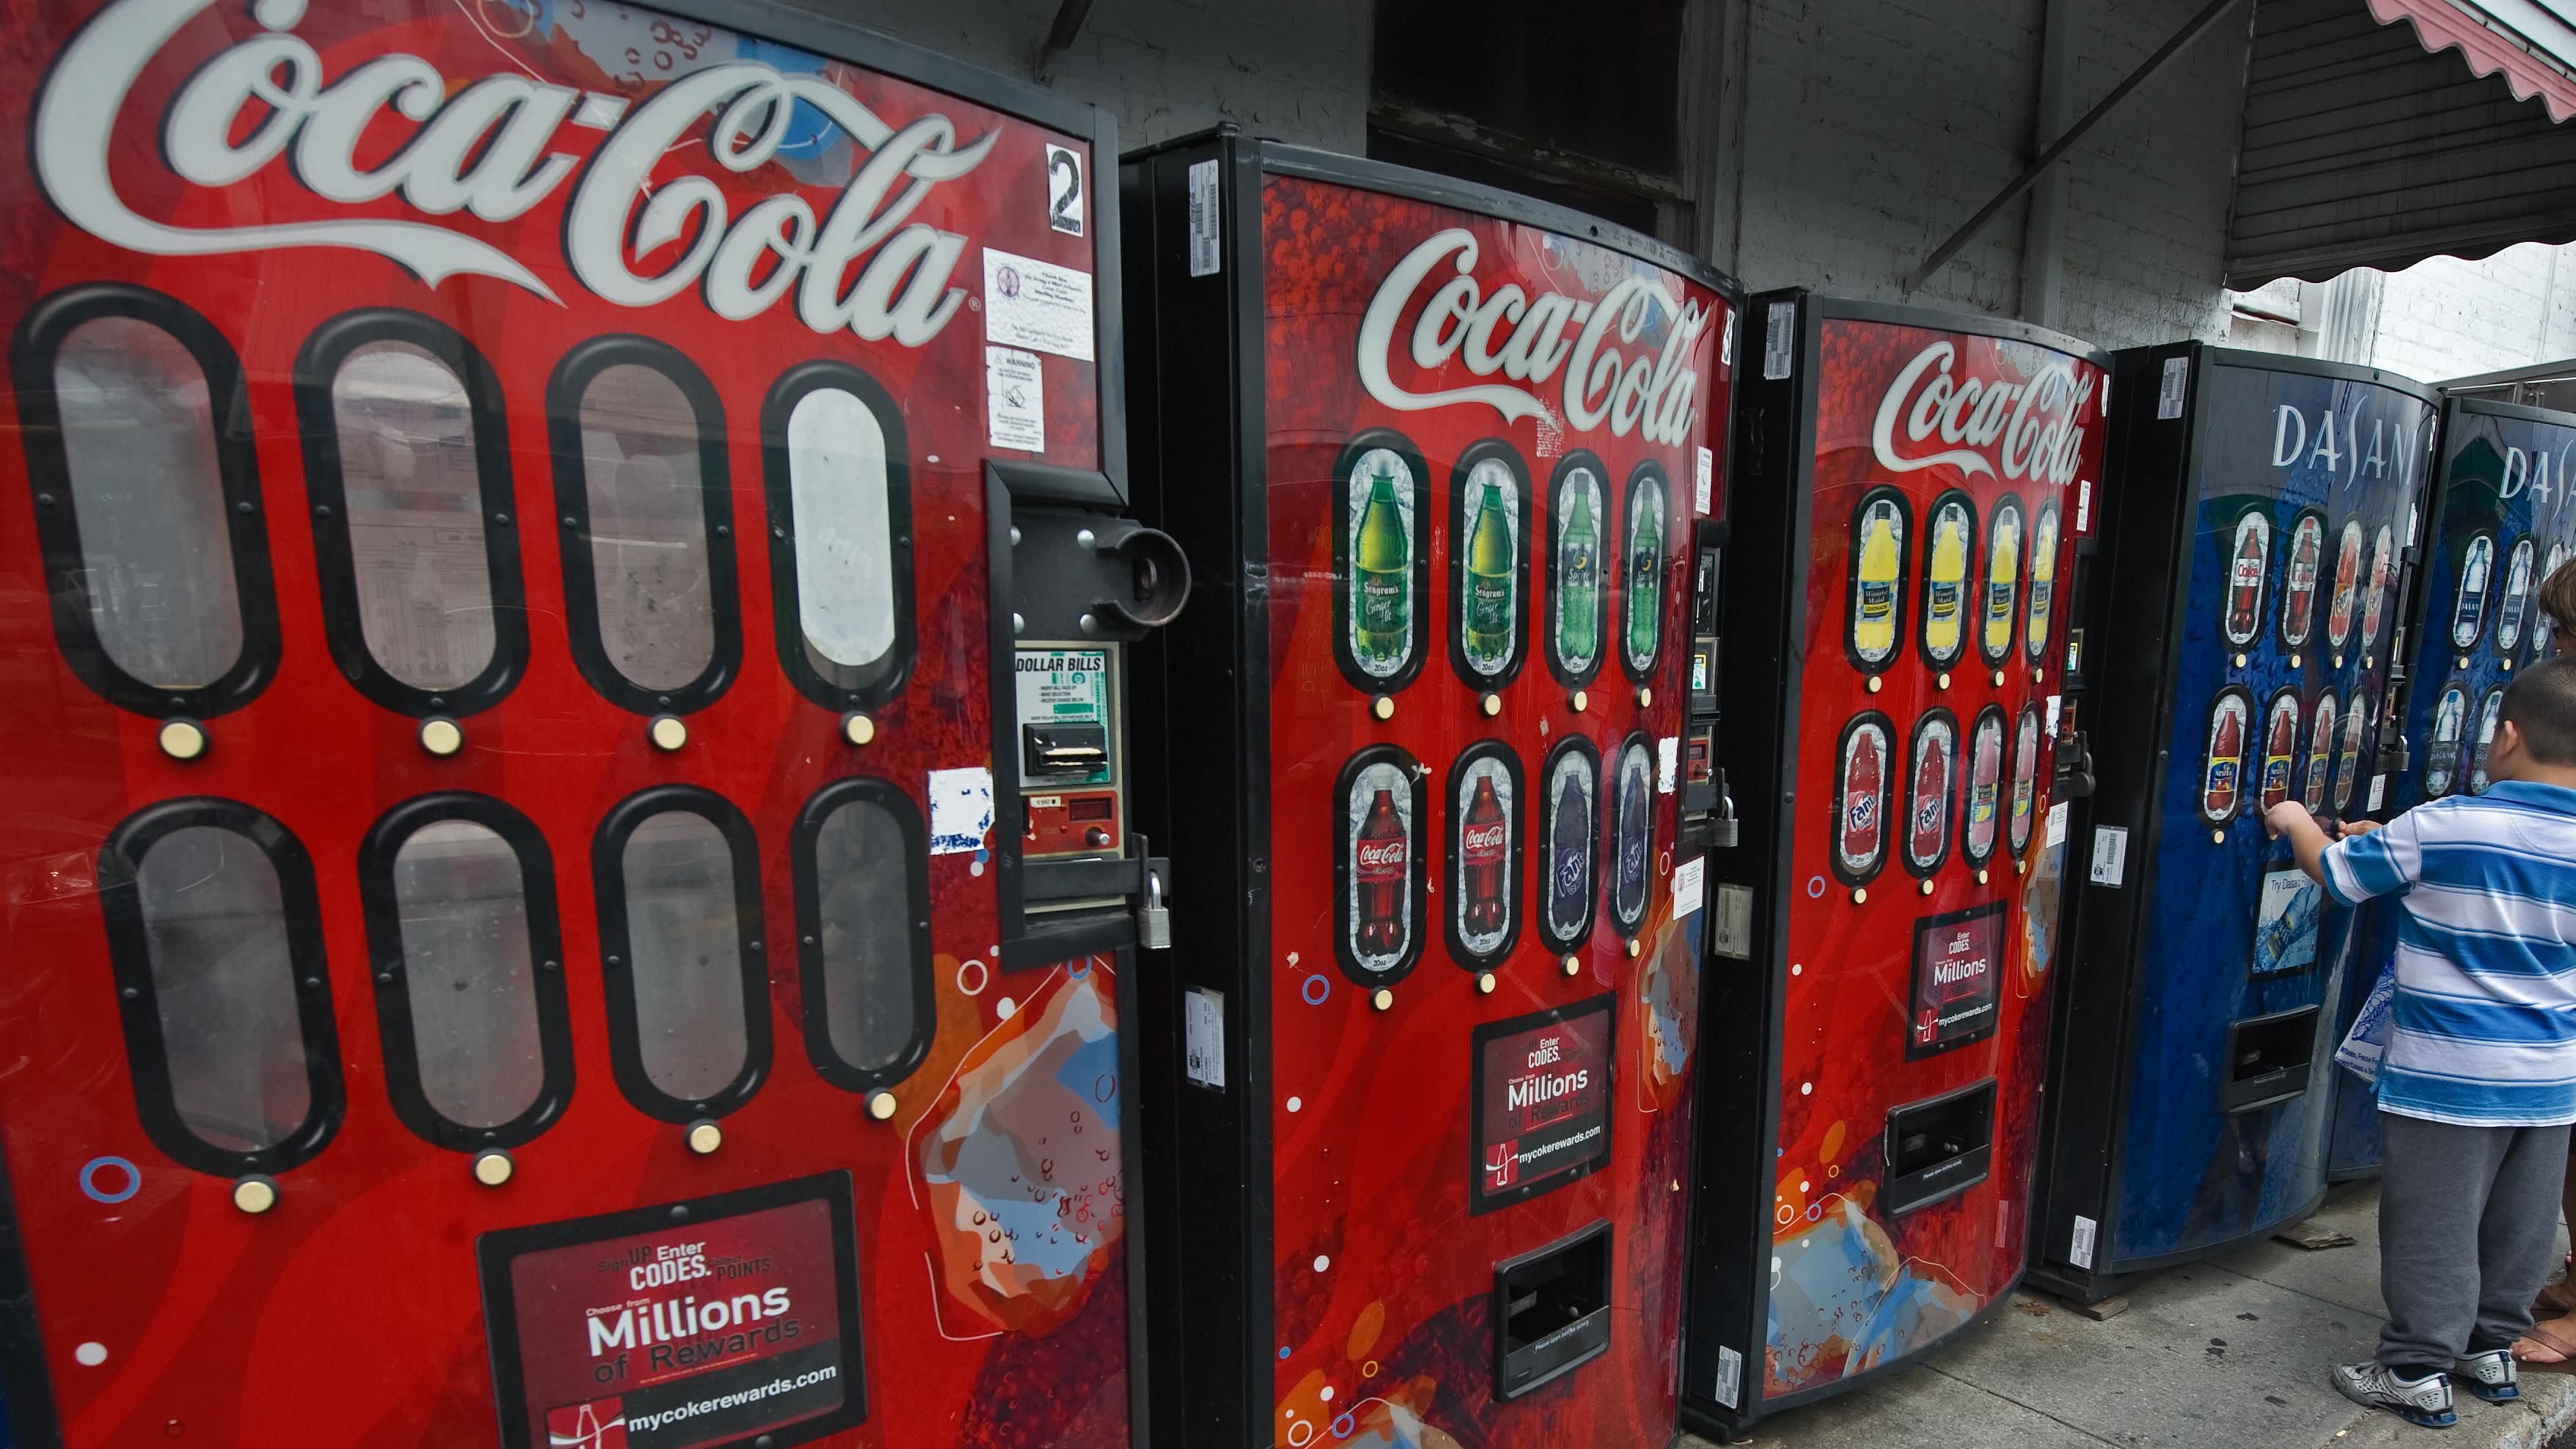 Coca-Cola just invented a way to save the soda machine from COVID-19